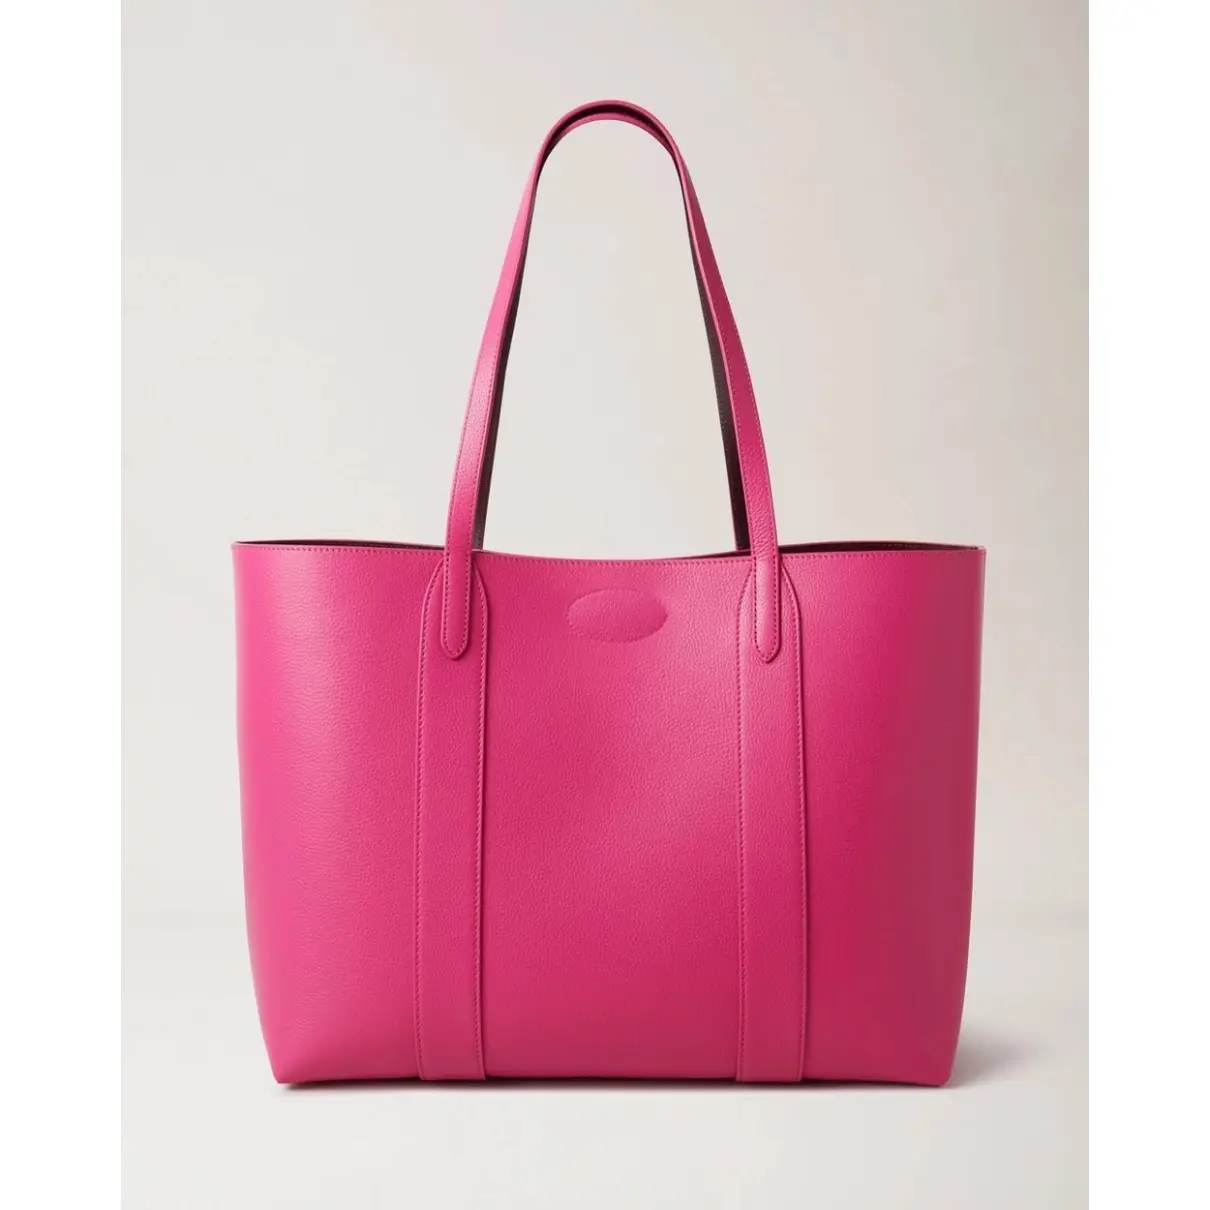 Bayswater tote leather tote Mulberry